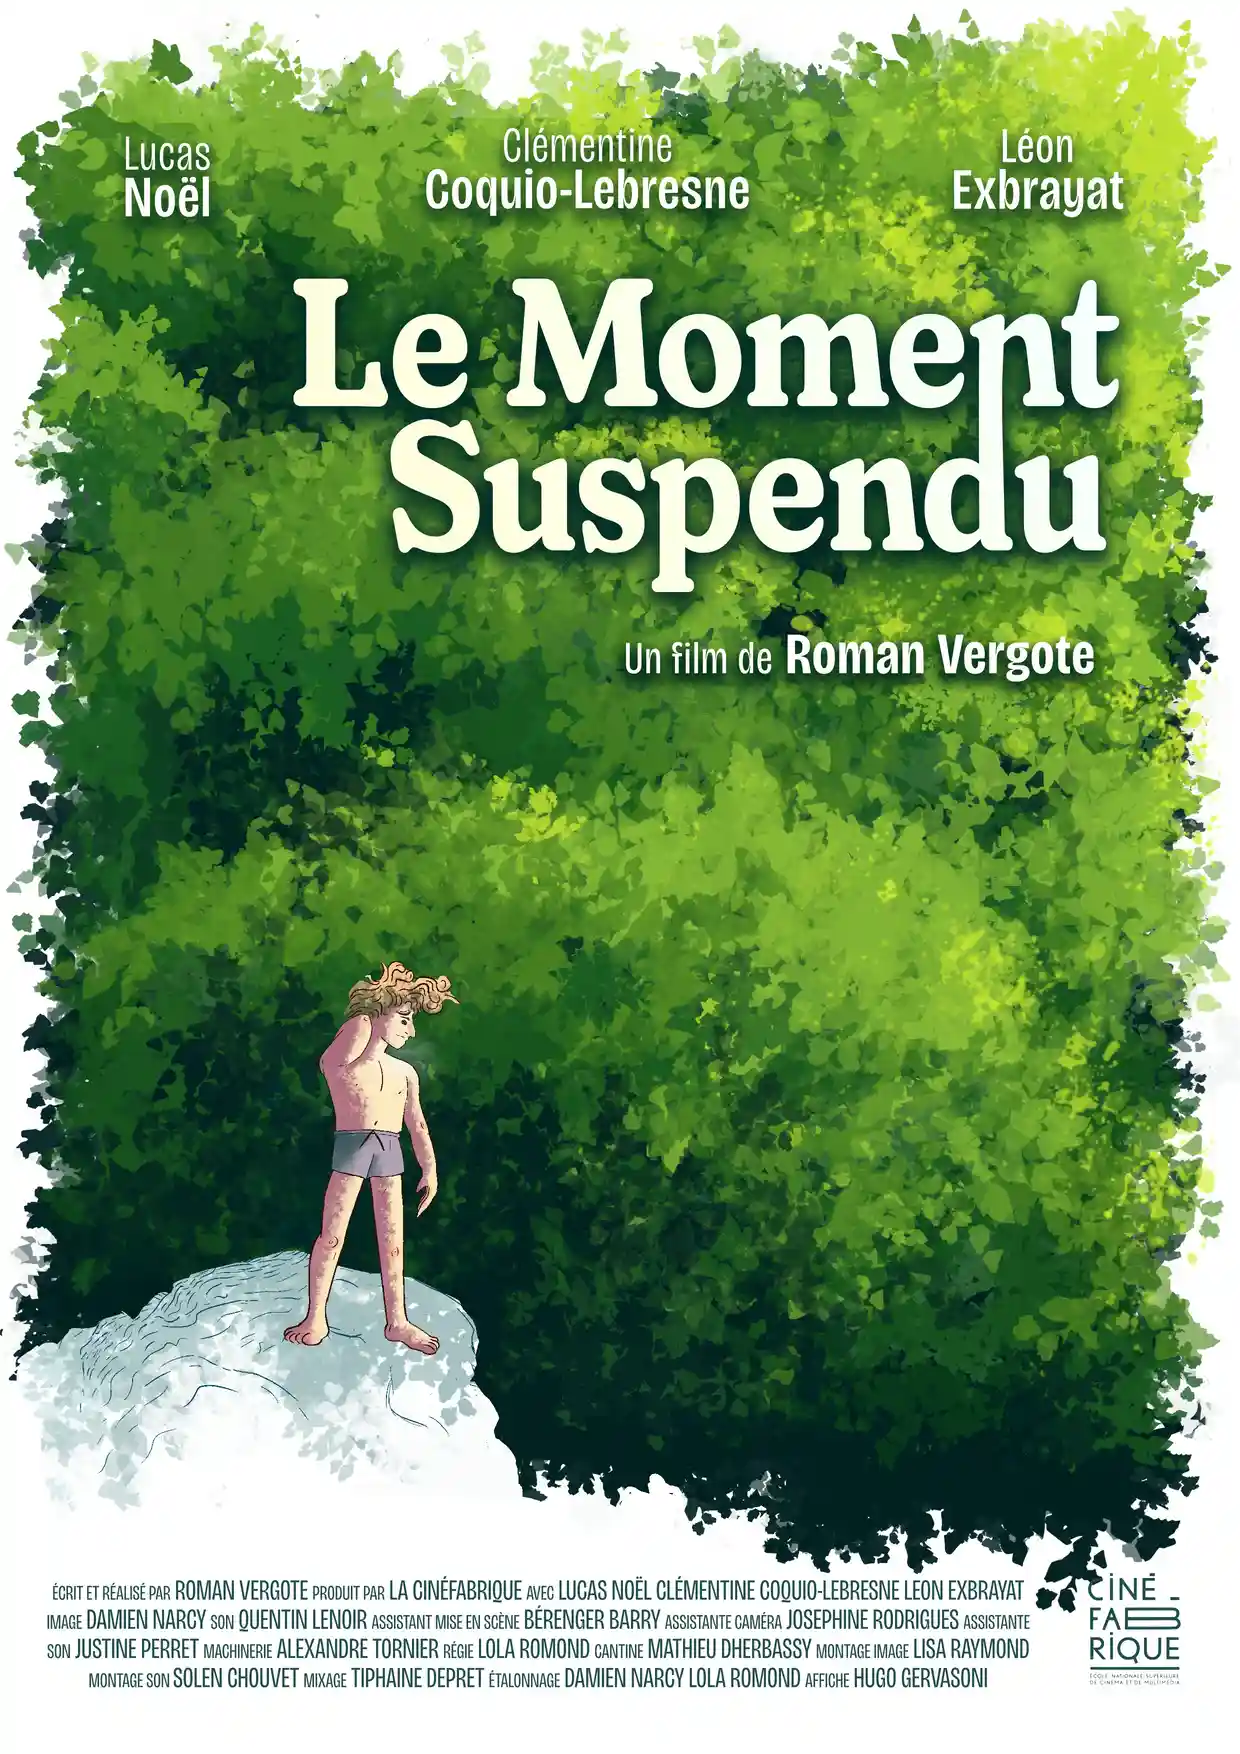 Poster for a short movie. Surrounded by looming vegetation, a young man in a bathing suit seems hesitant to jump from the big rock he's on.